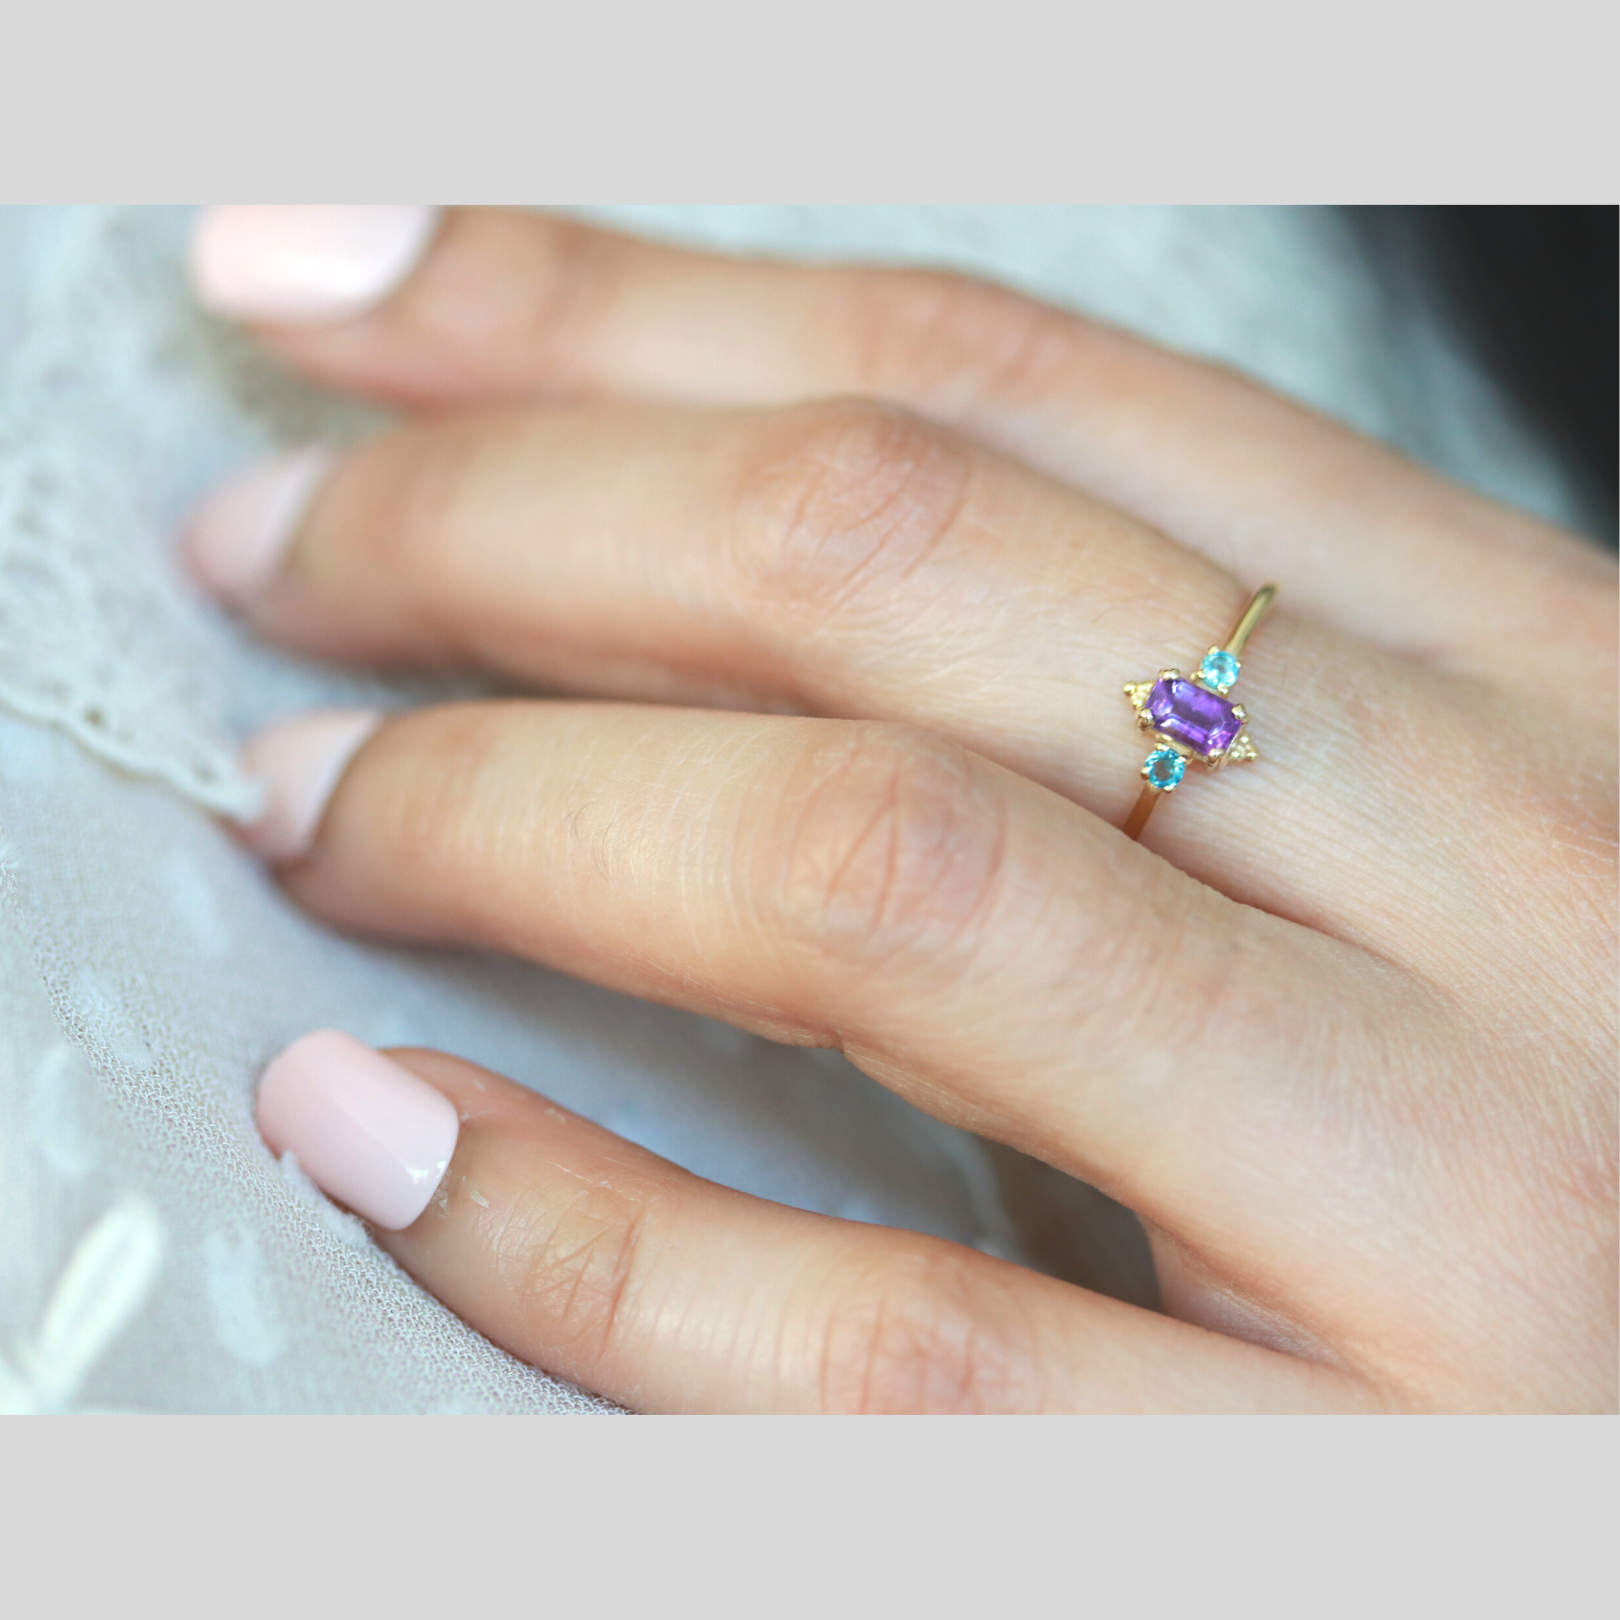 Solid 14k gold emerald cut amethyst and blue topaz ring